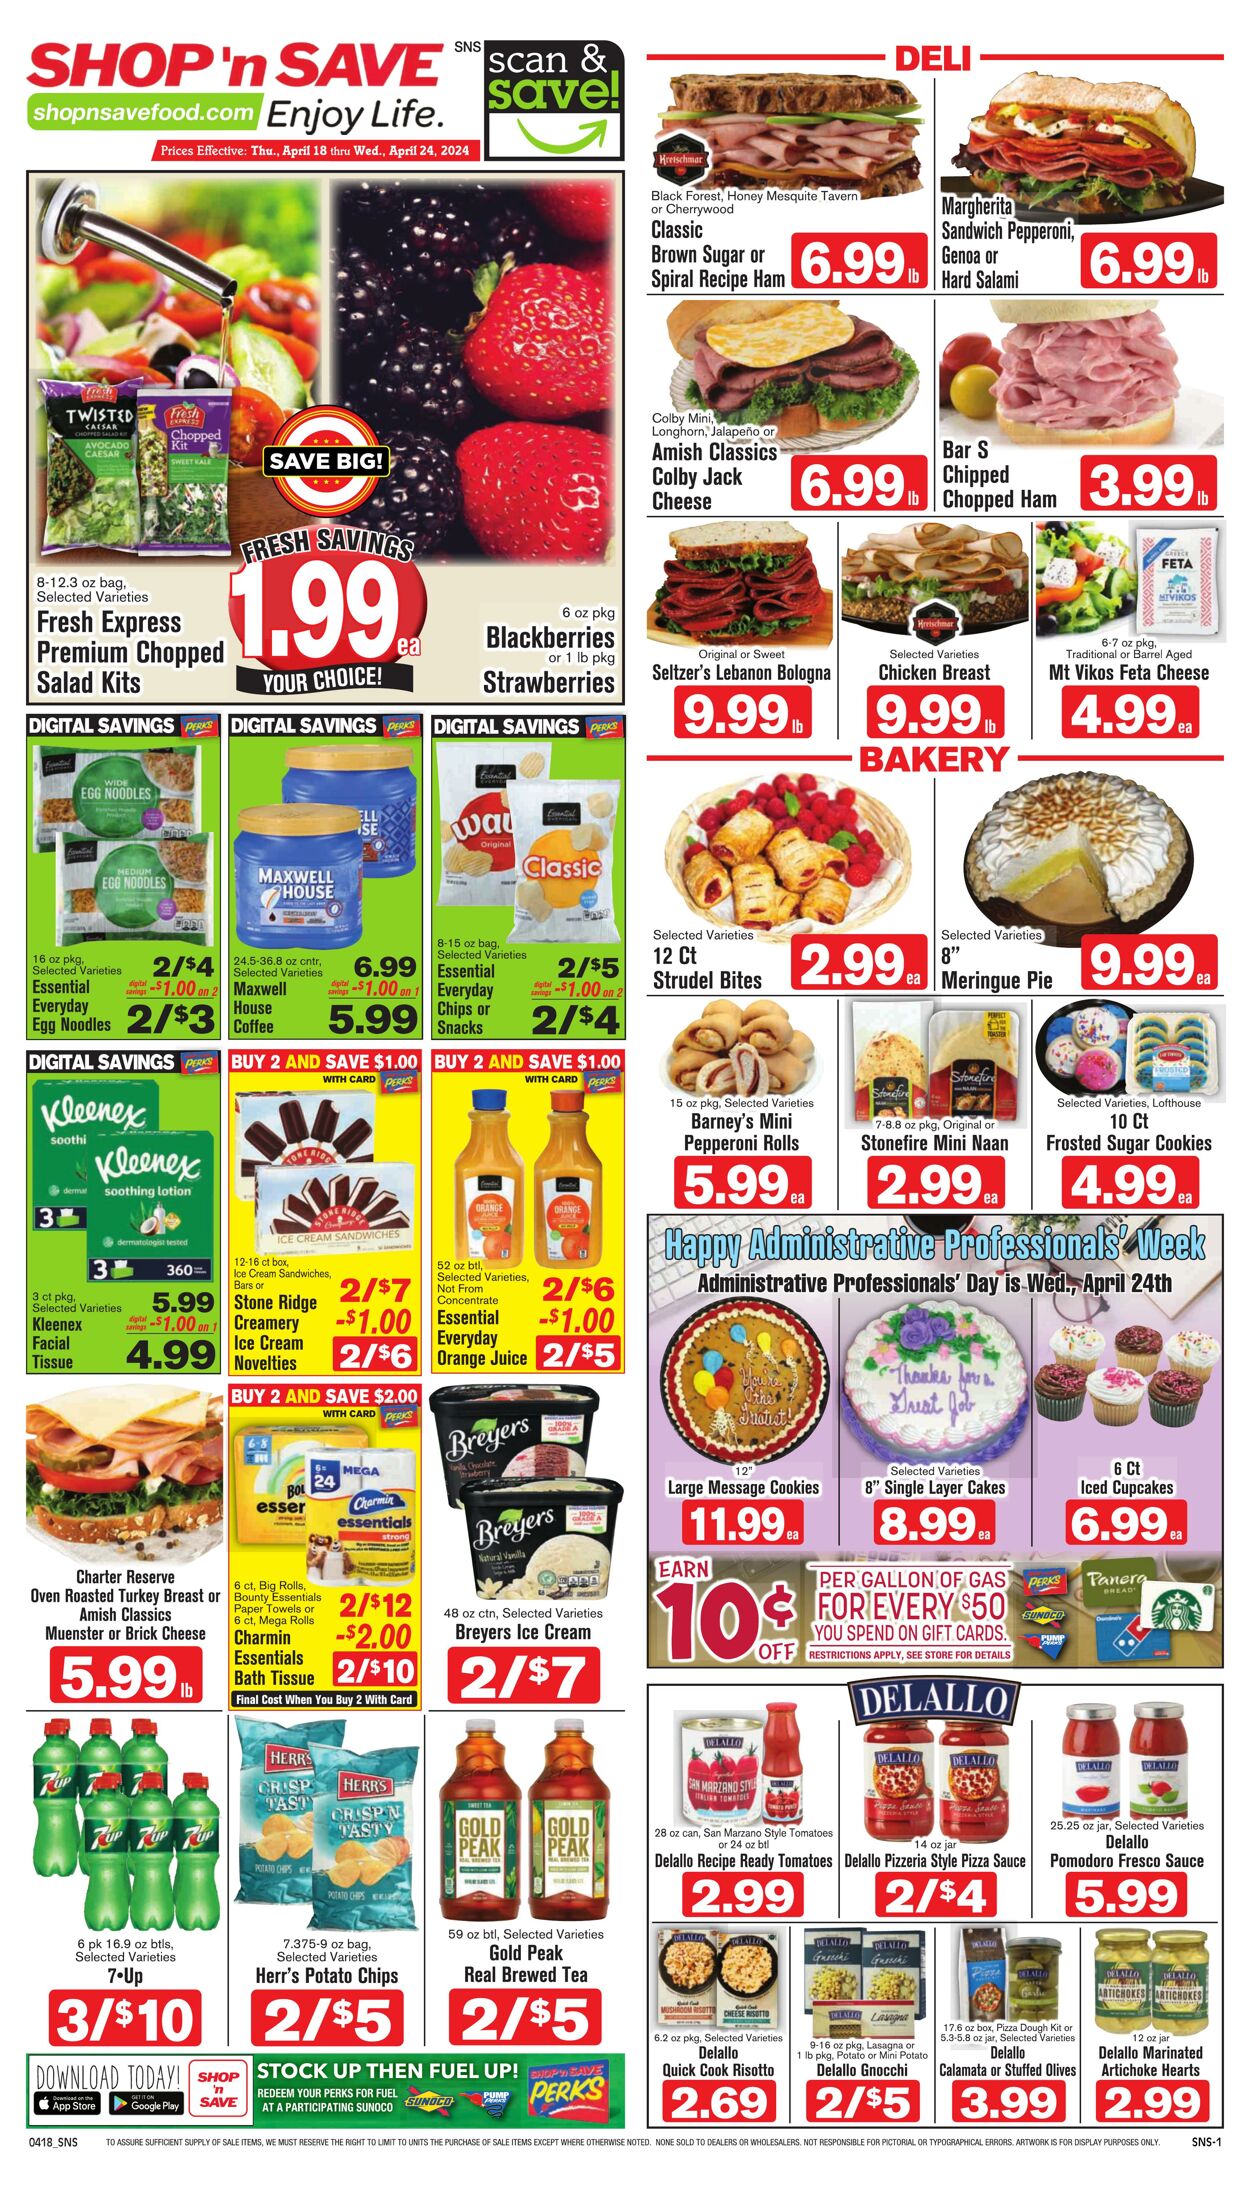 Shop'n Save Promotional weekly ads